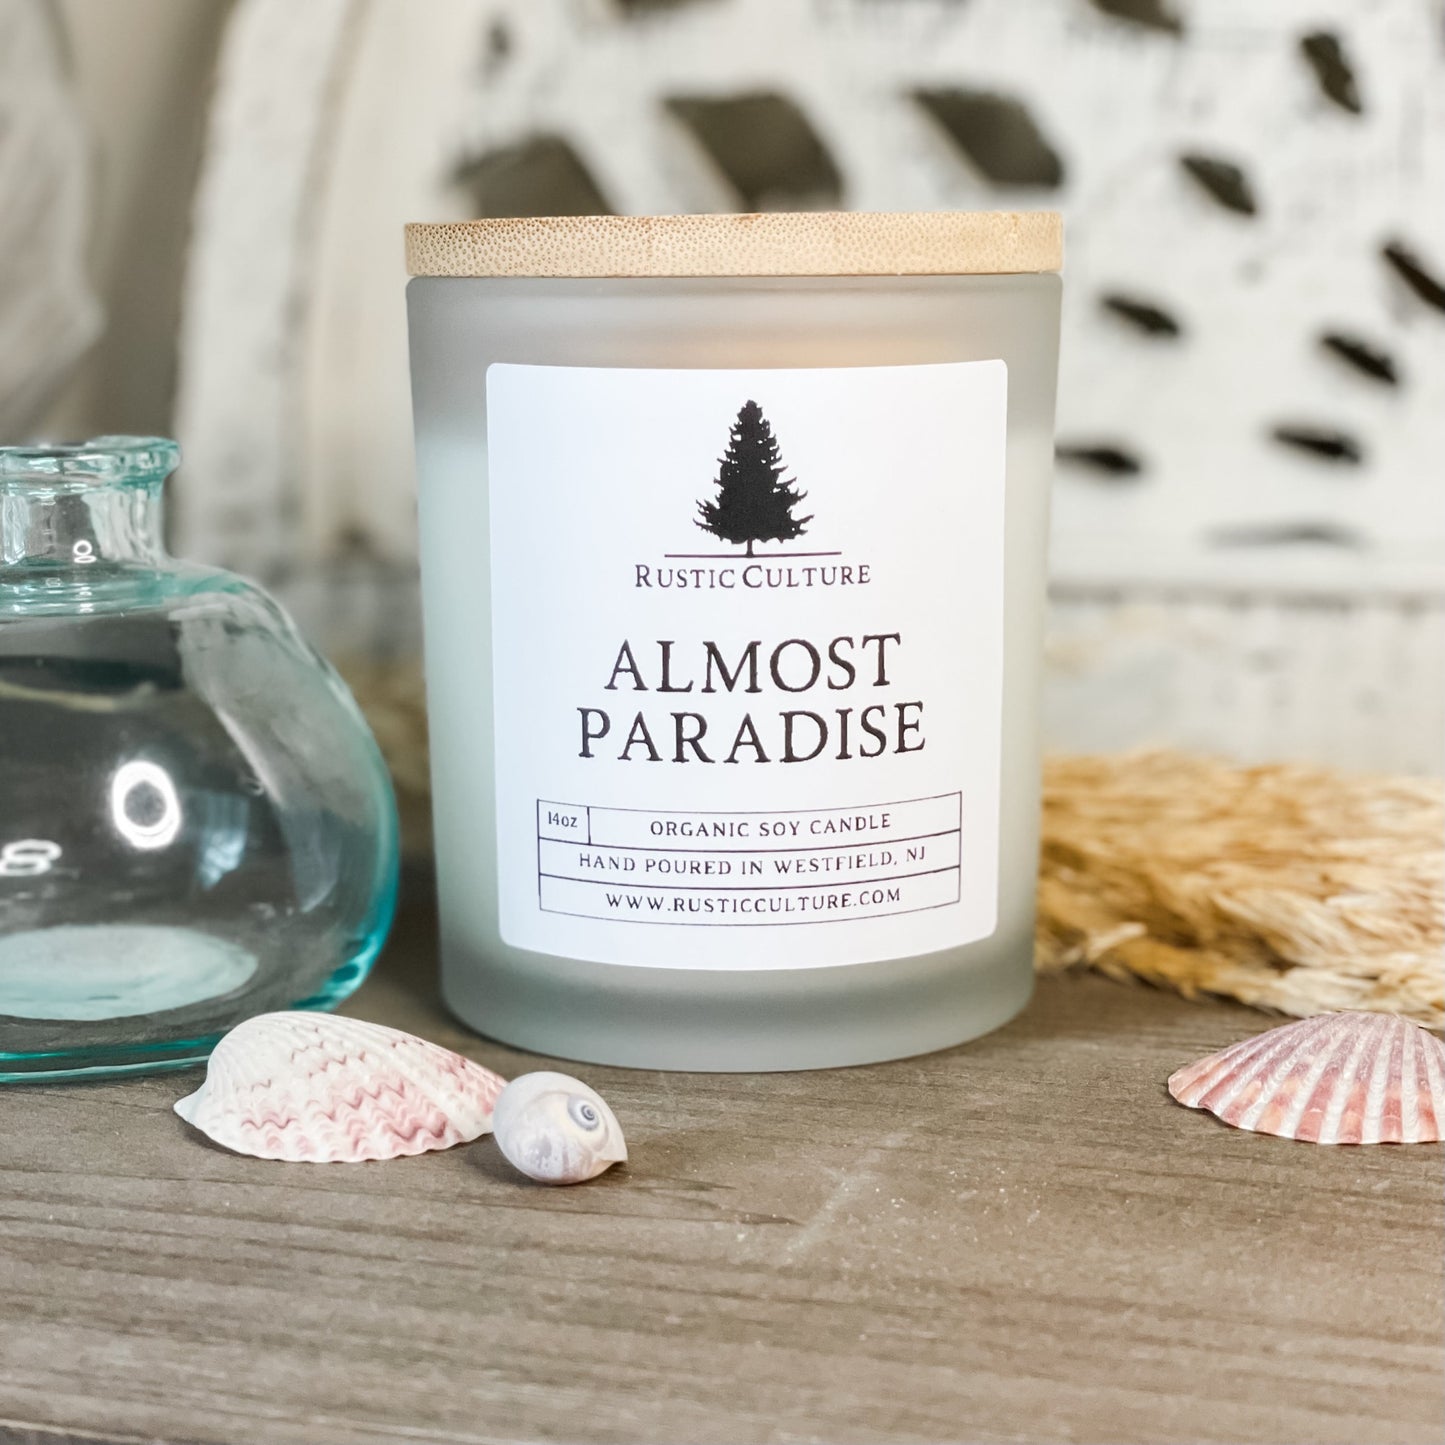 Almost Paradise candle. Natural soy candle with a light tropical scent.